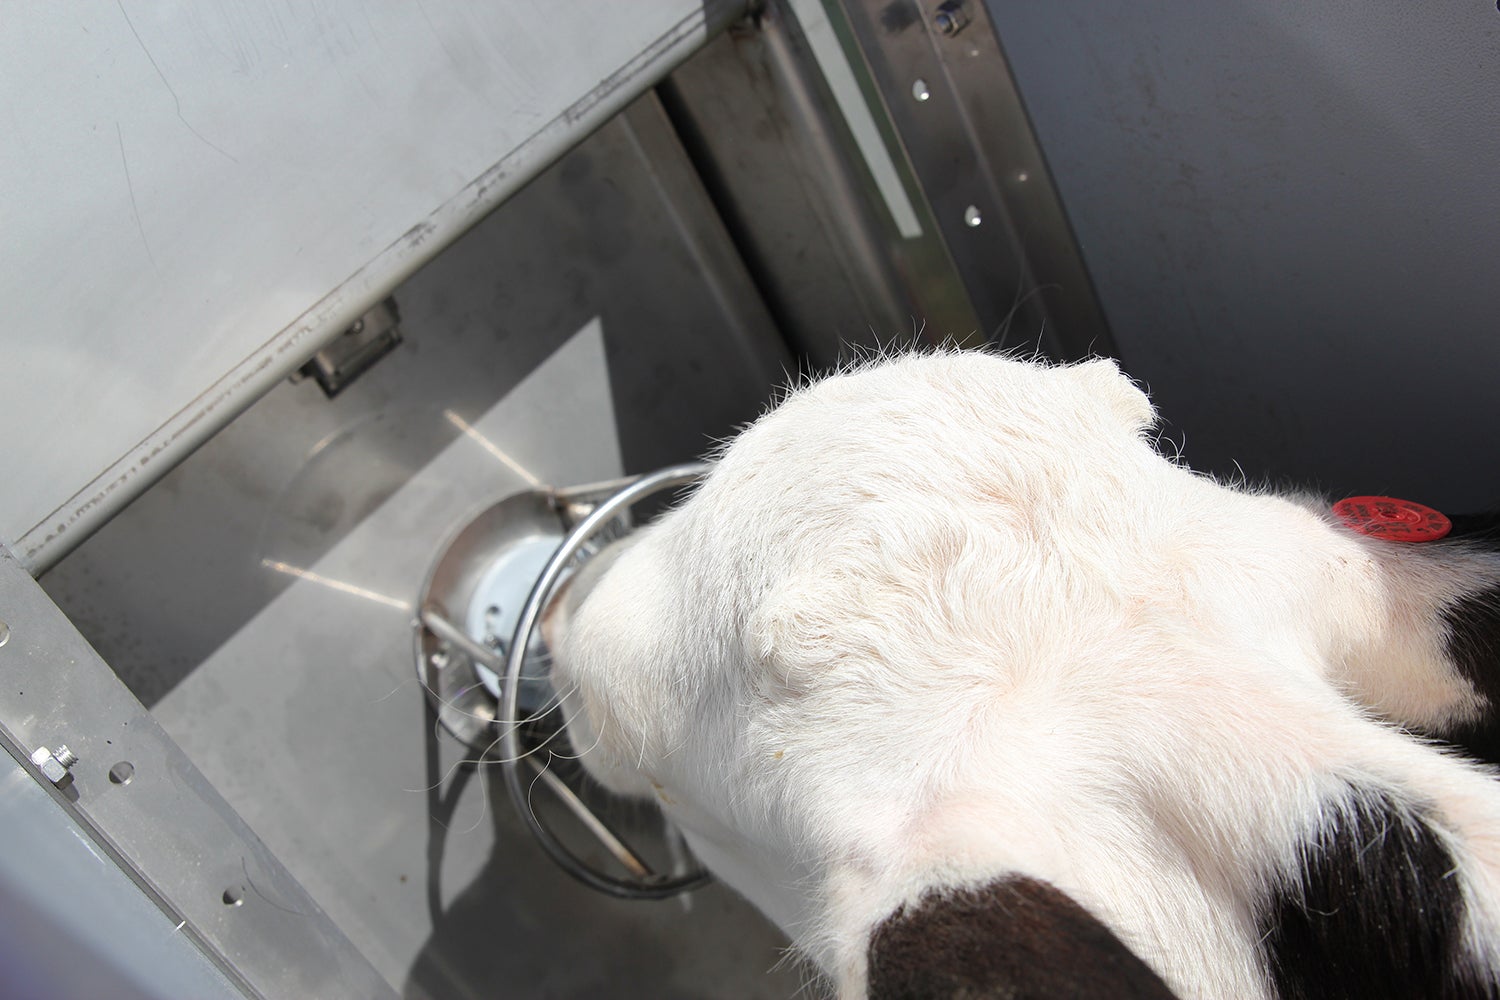 A cow calf eating from an automatic feeder